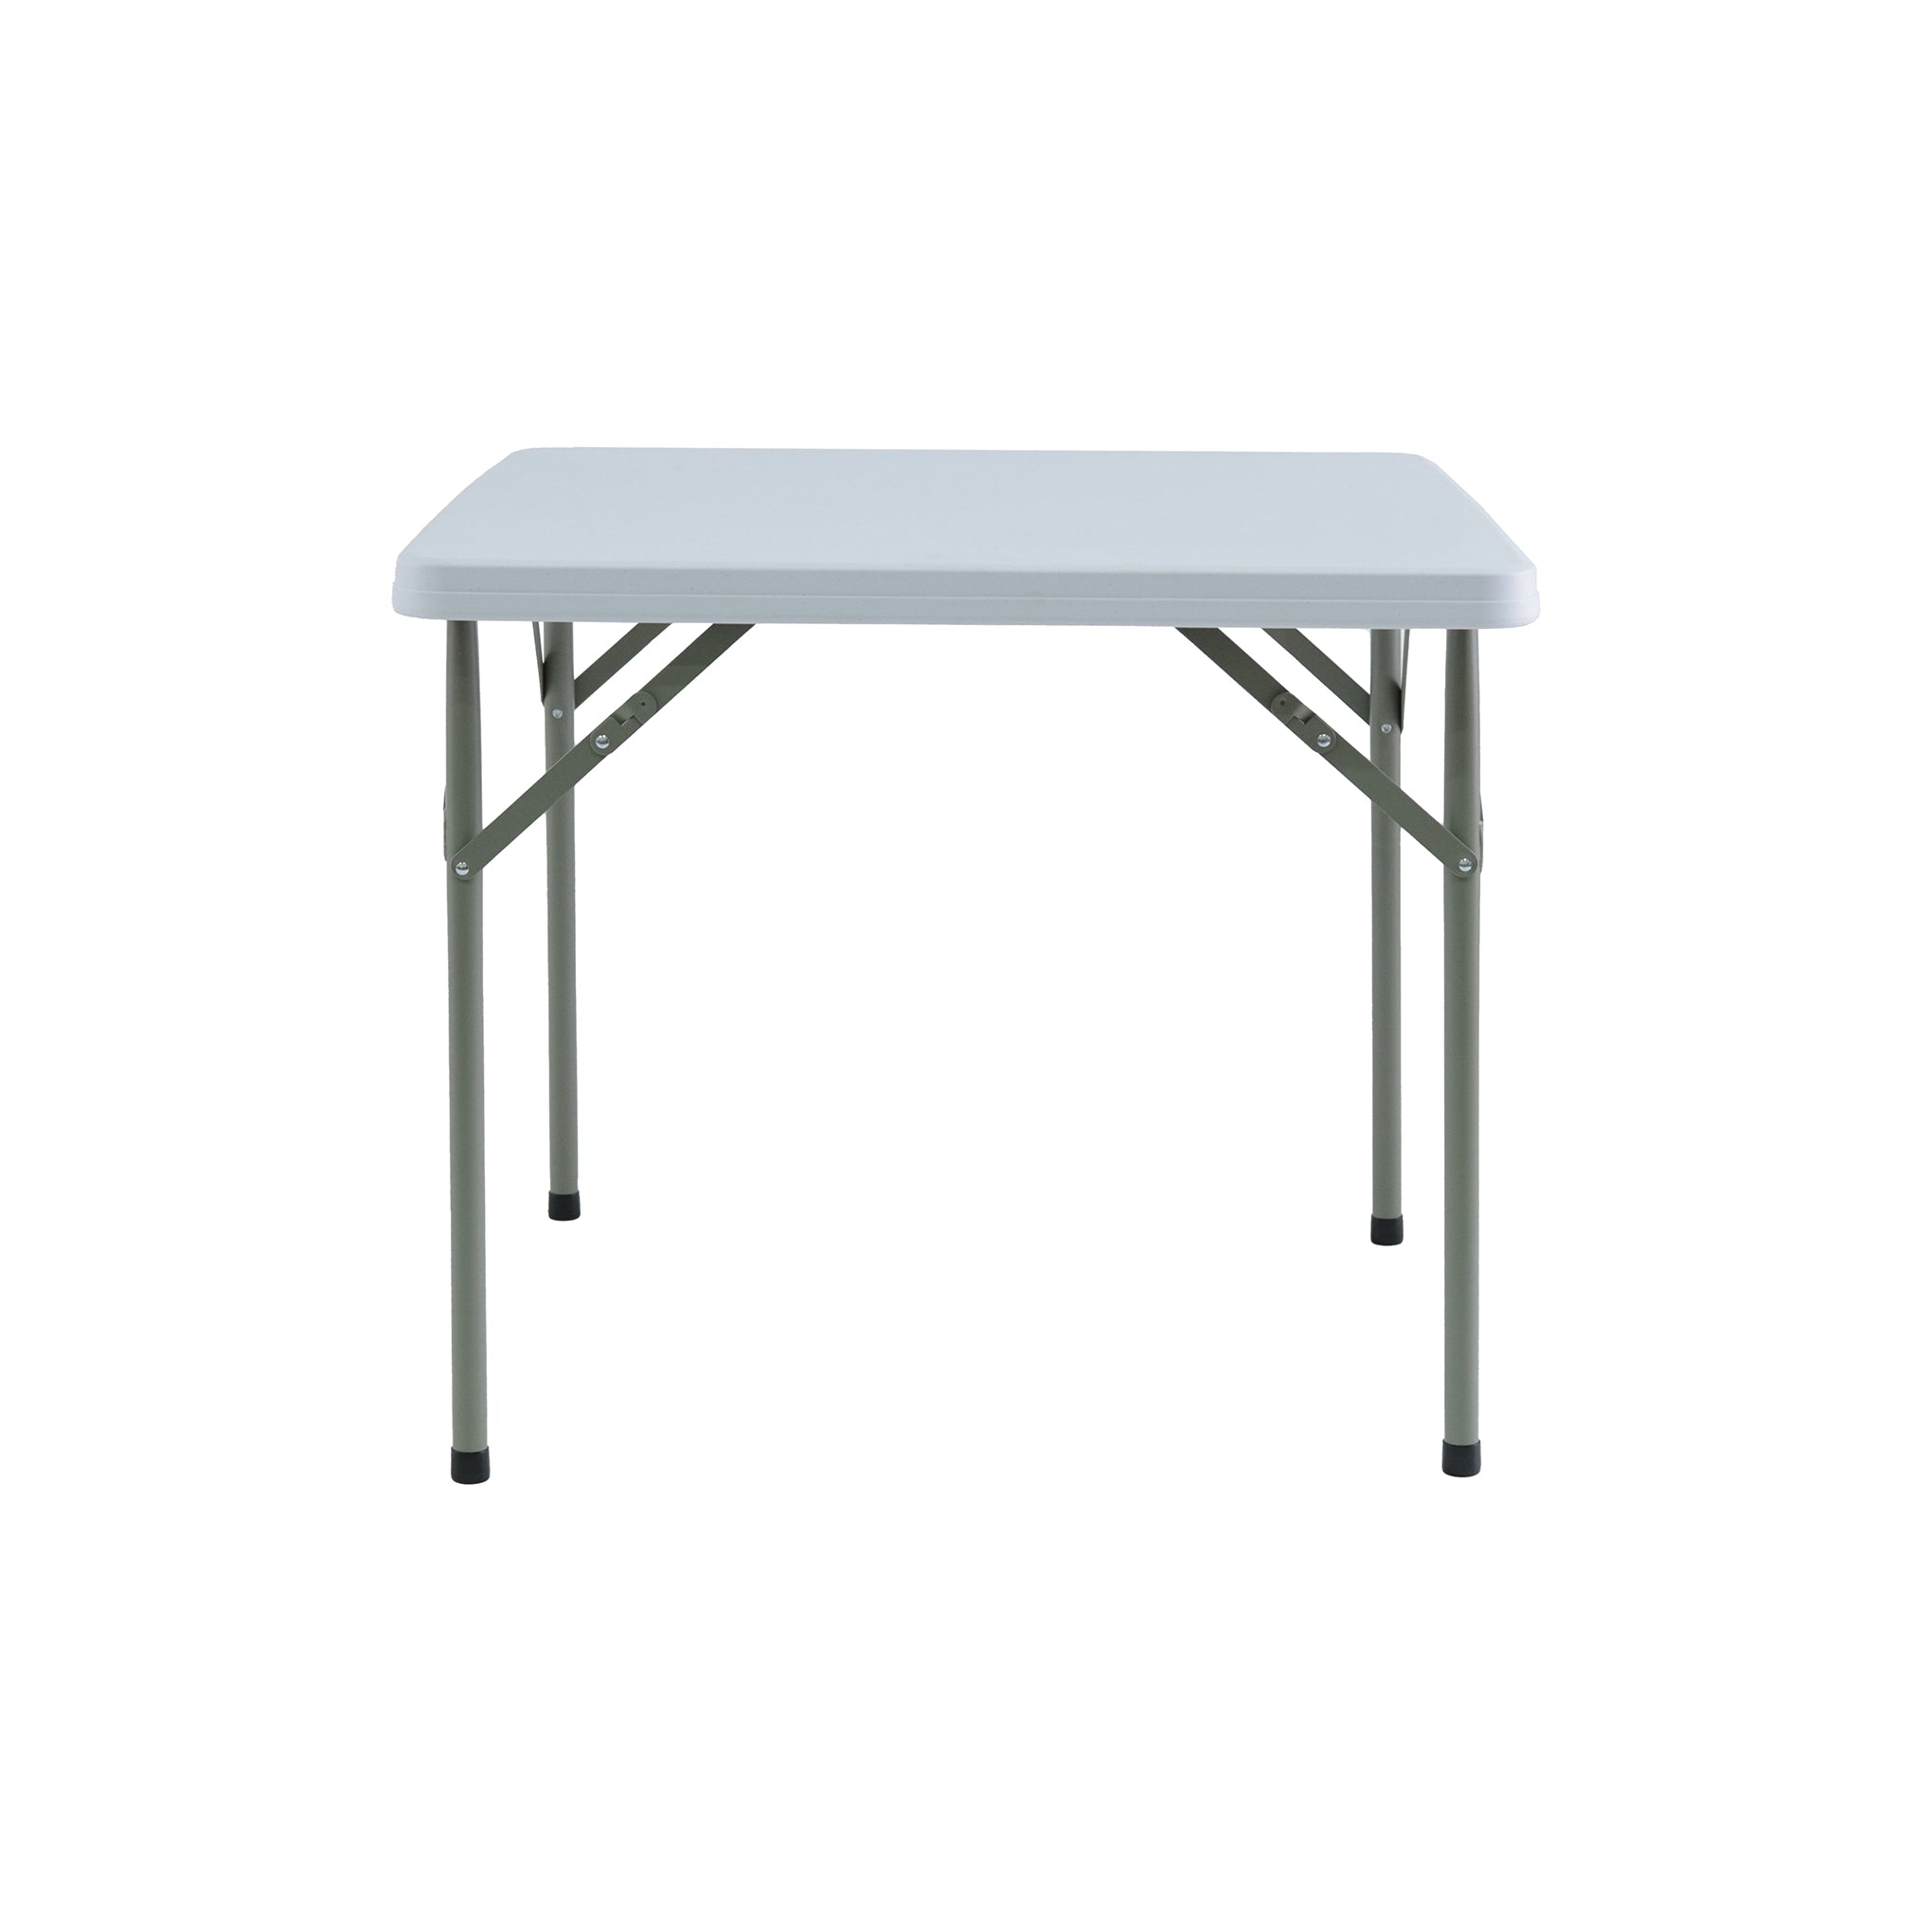 <b>Erie 3FT Square HDPE Folding In Half Banquet Table With Metal Leg</b><br>L860 X W860 X H740